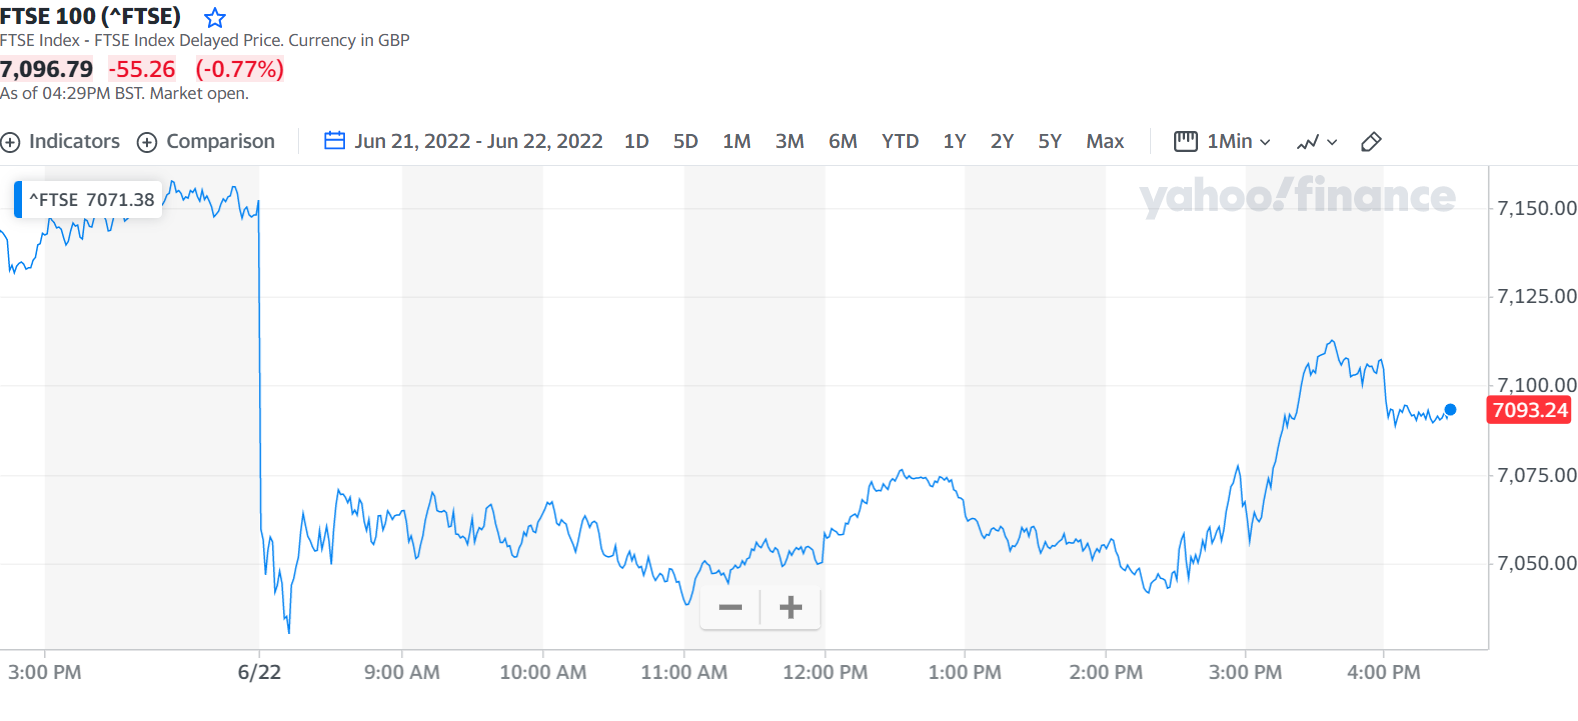 FTSE 100 Closes 0.77% Down, Prospects Of A More Aggressive BoC Offering Canadian Dollar Support - 1